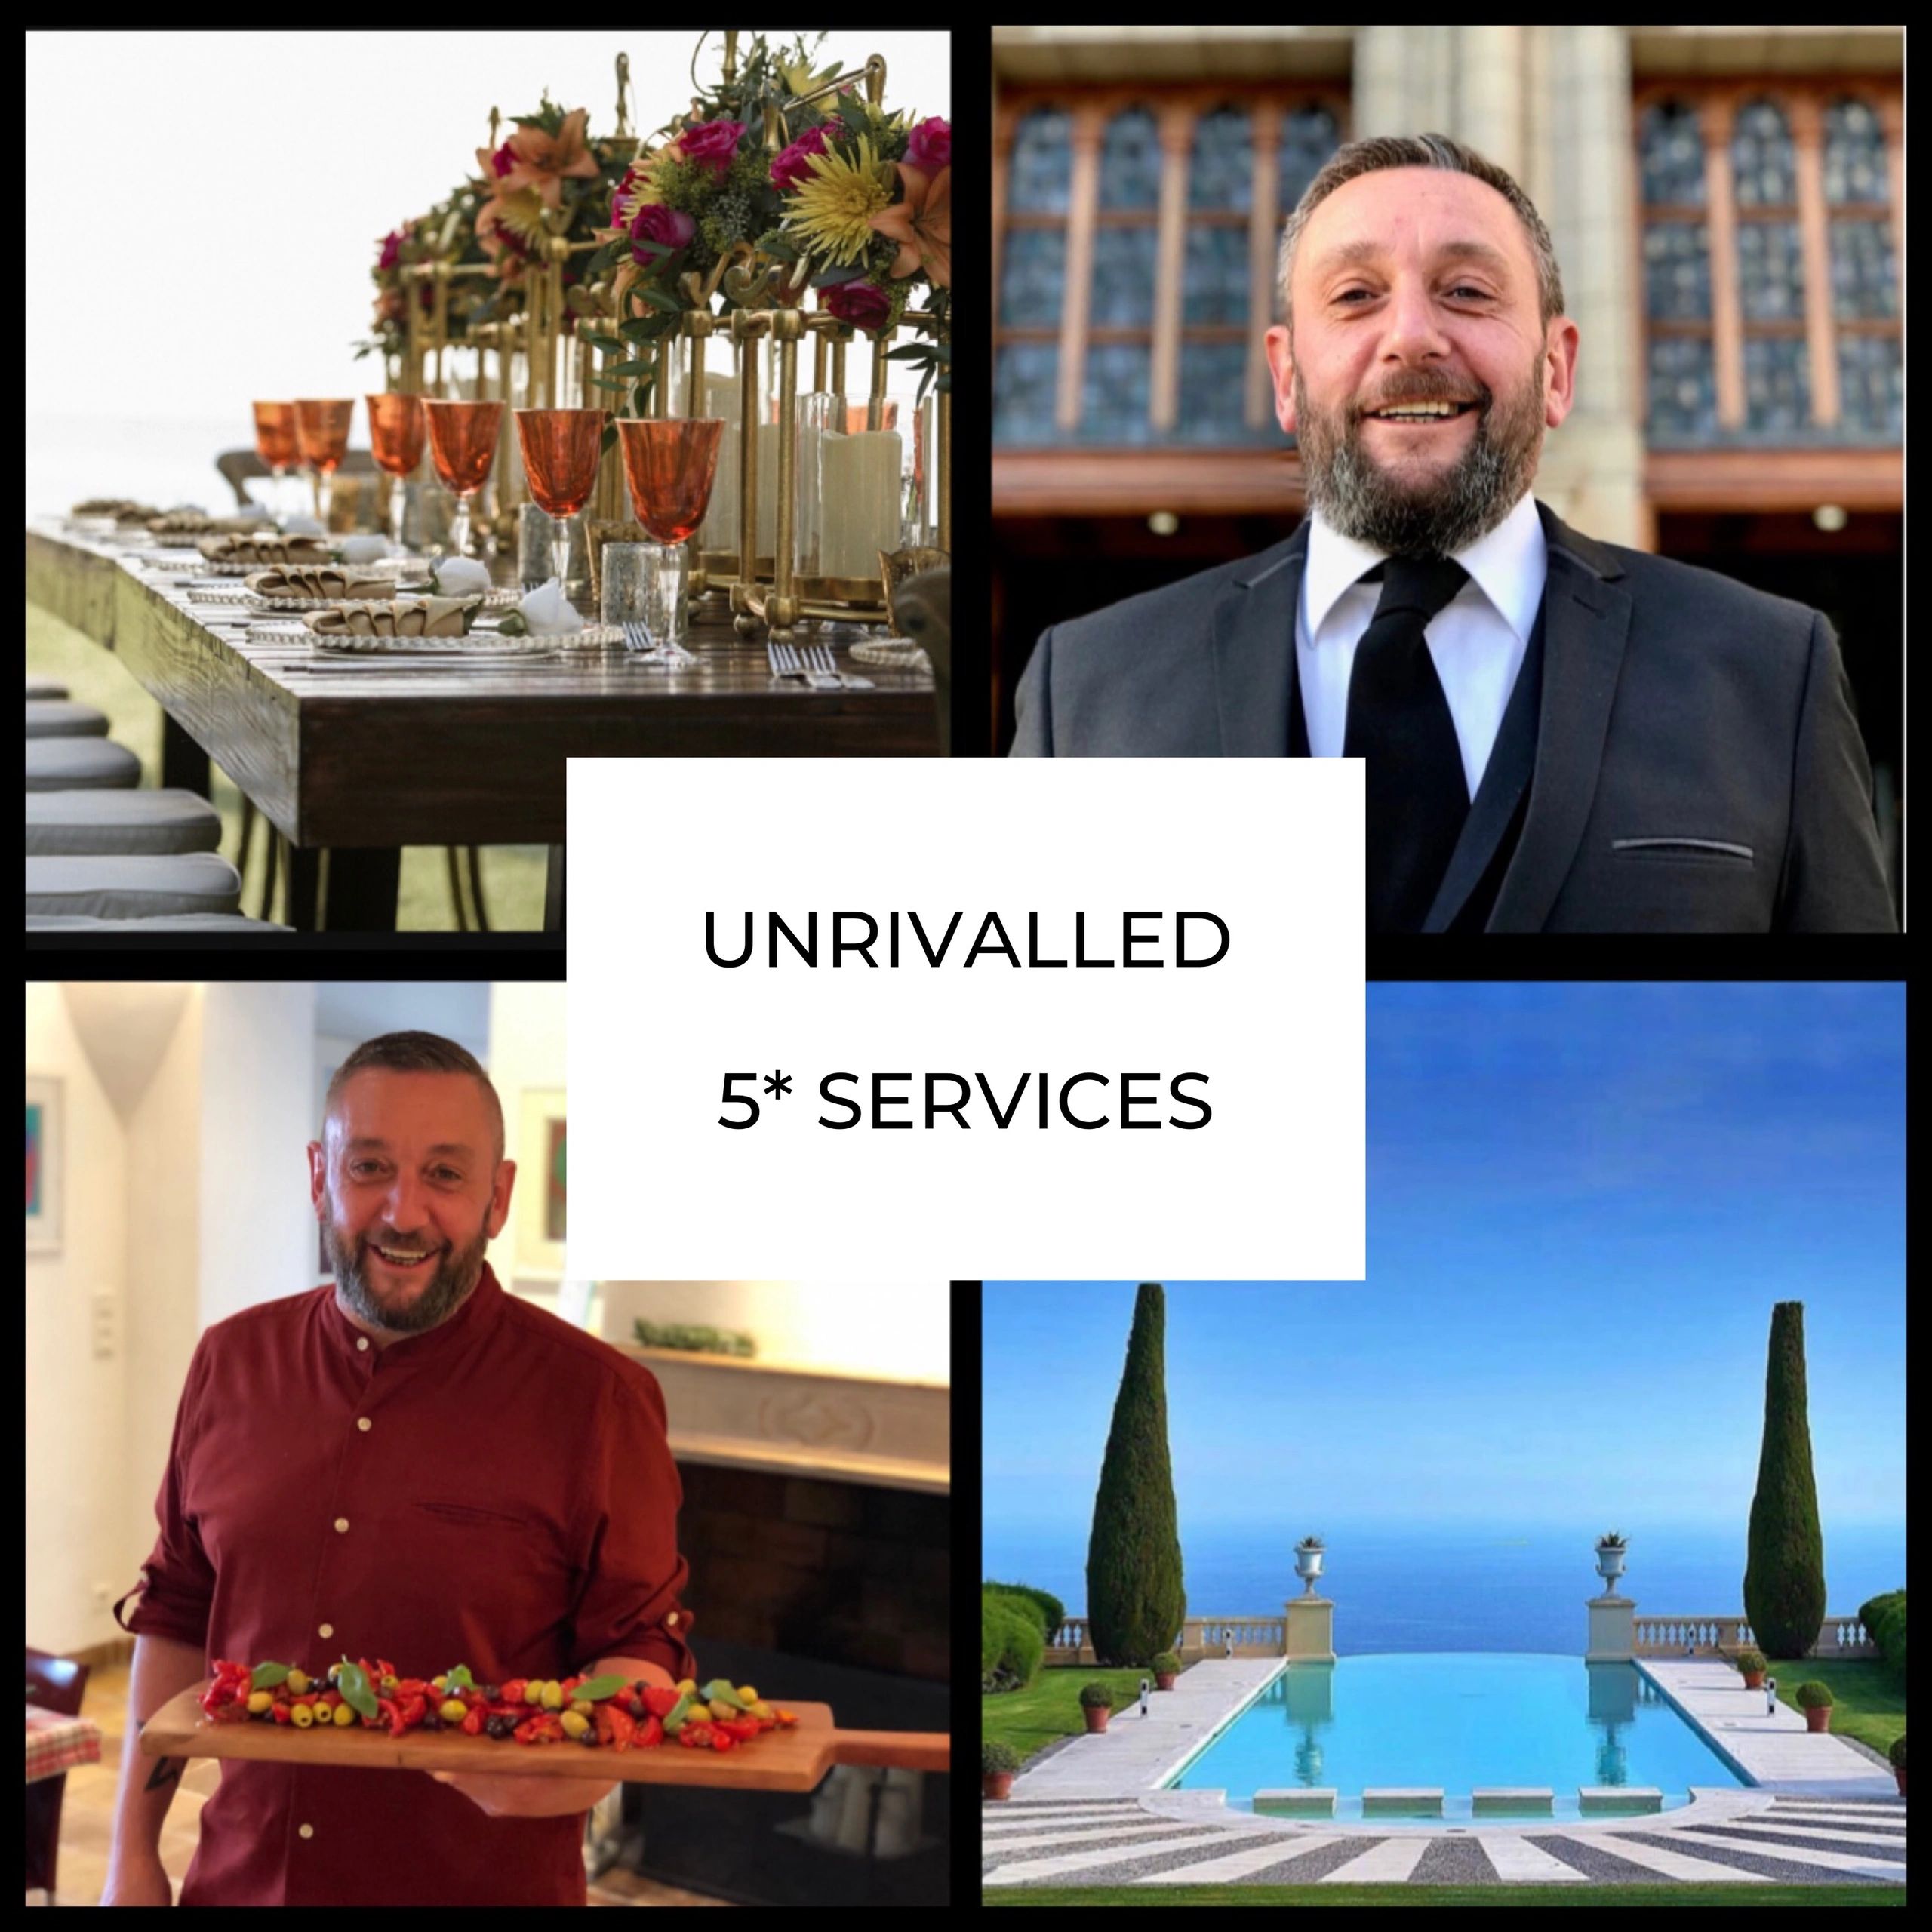 Unrivalled 5 star hospitality services from danthebutler